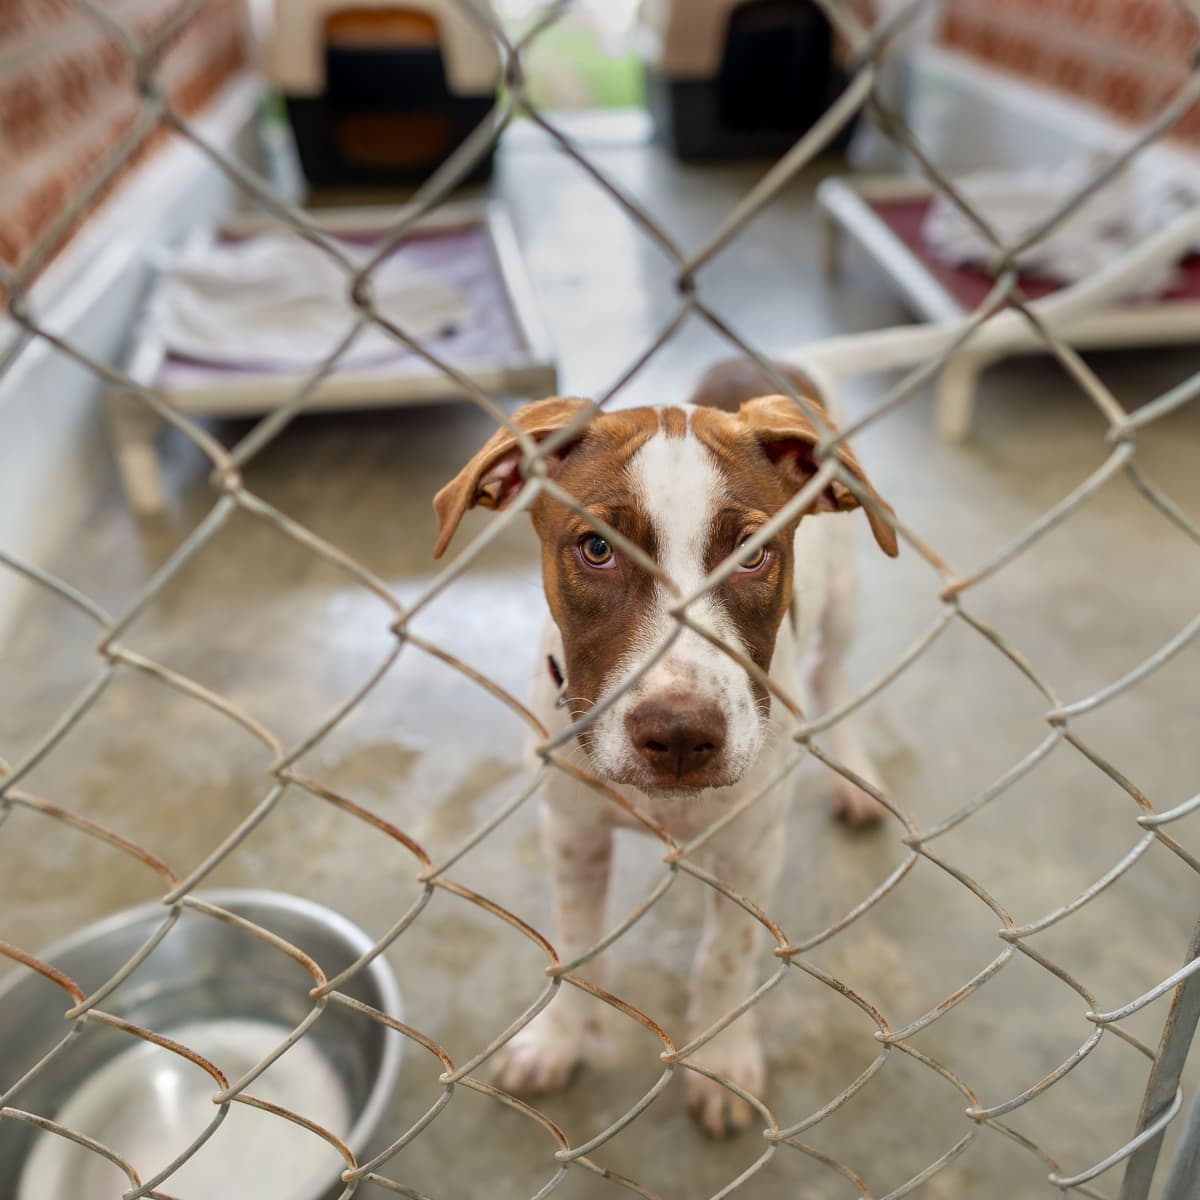 Unhappy Animals Languish in Overcrowded Shelters - The New York Times